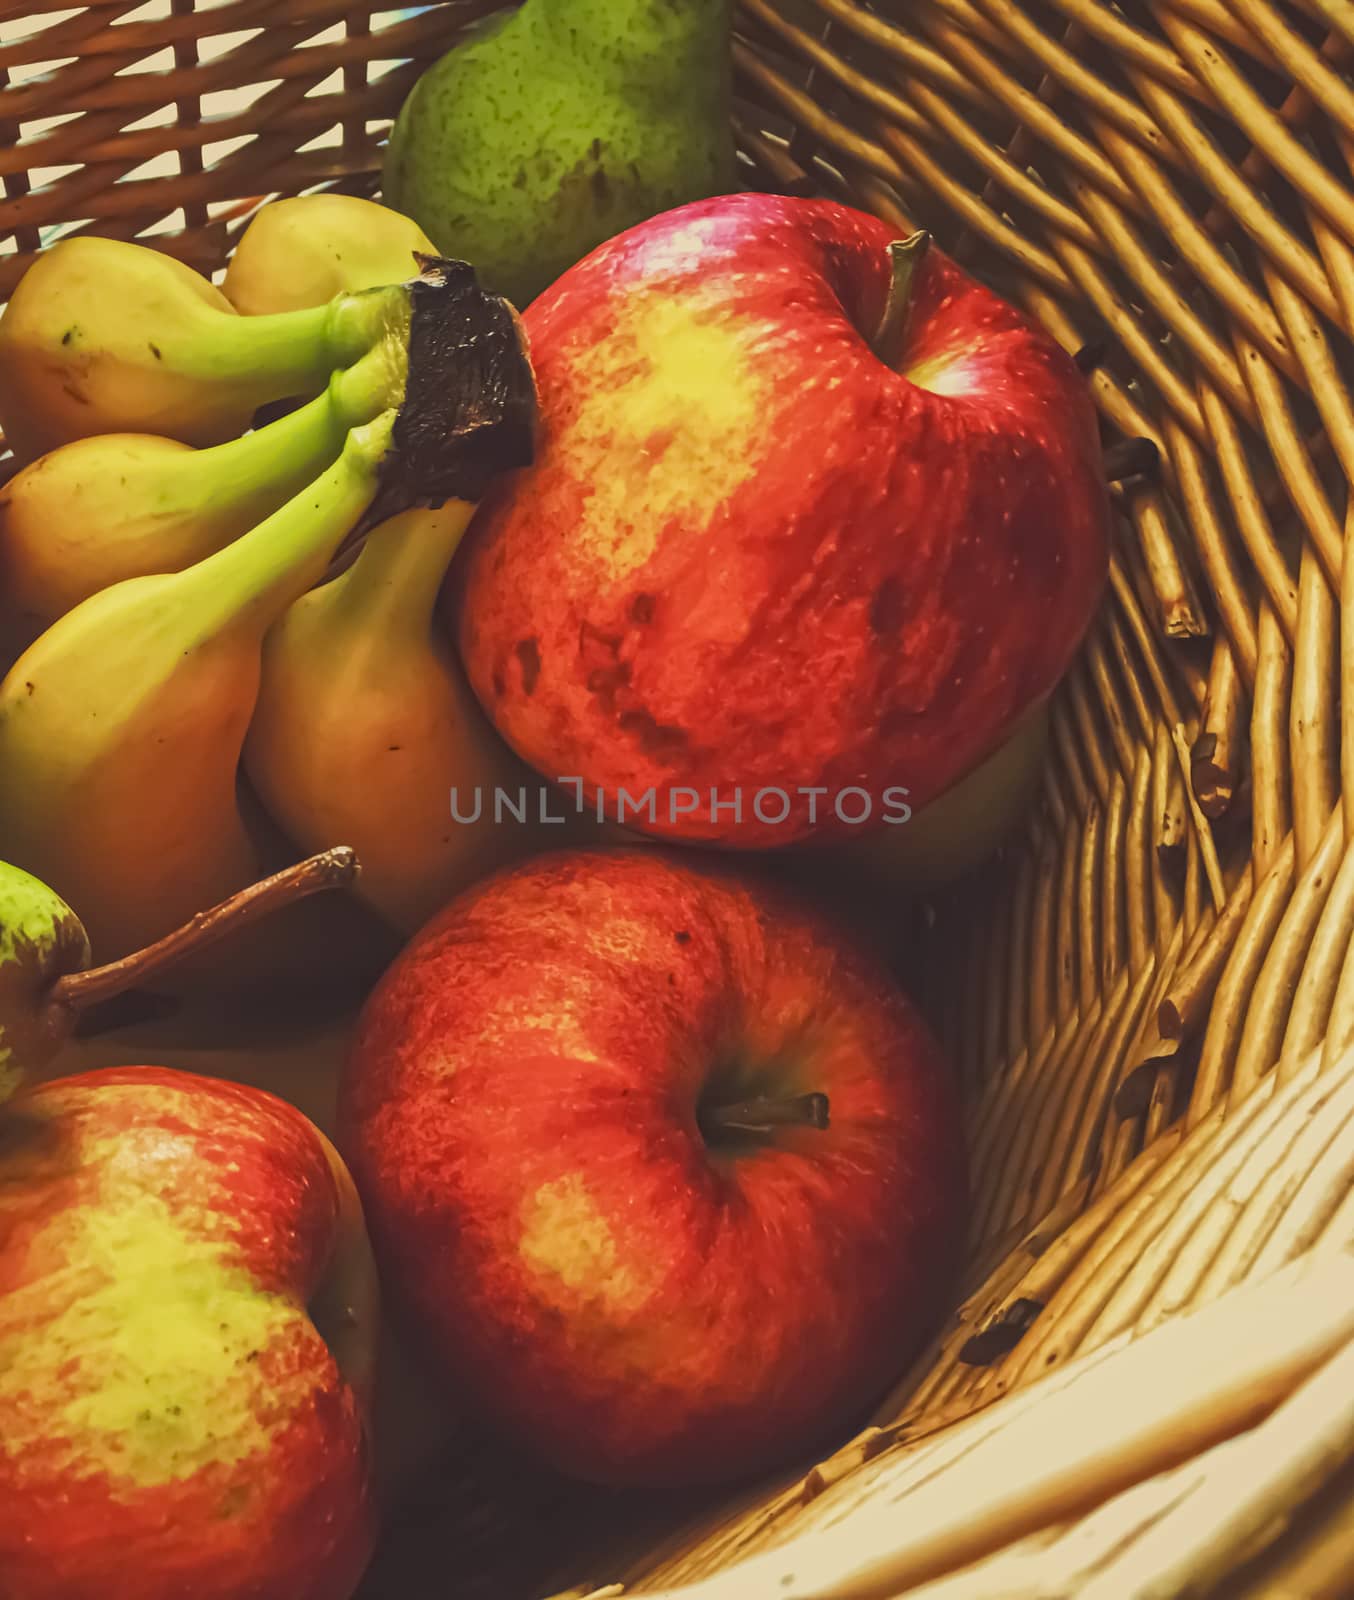 Organic apples, pears and bananas on rustic in a wicker basket by Anneleven